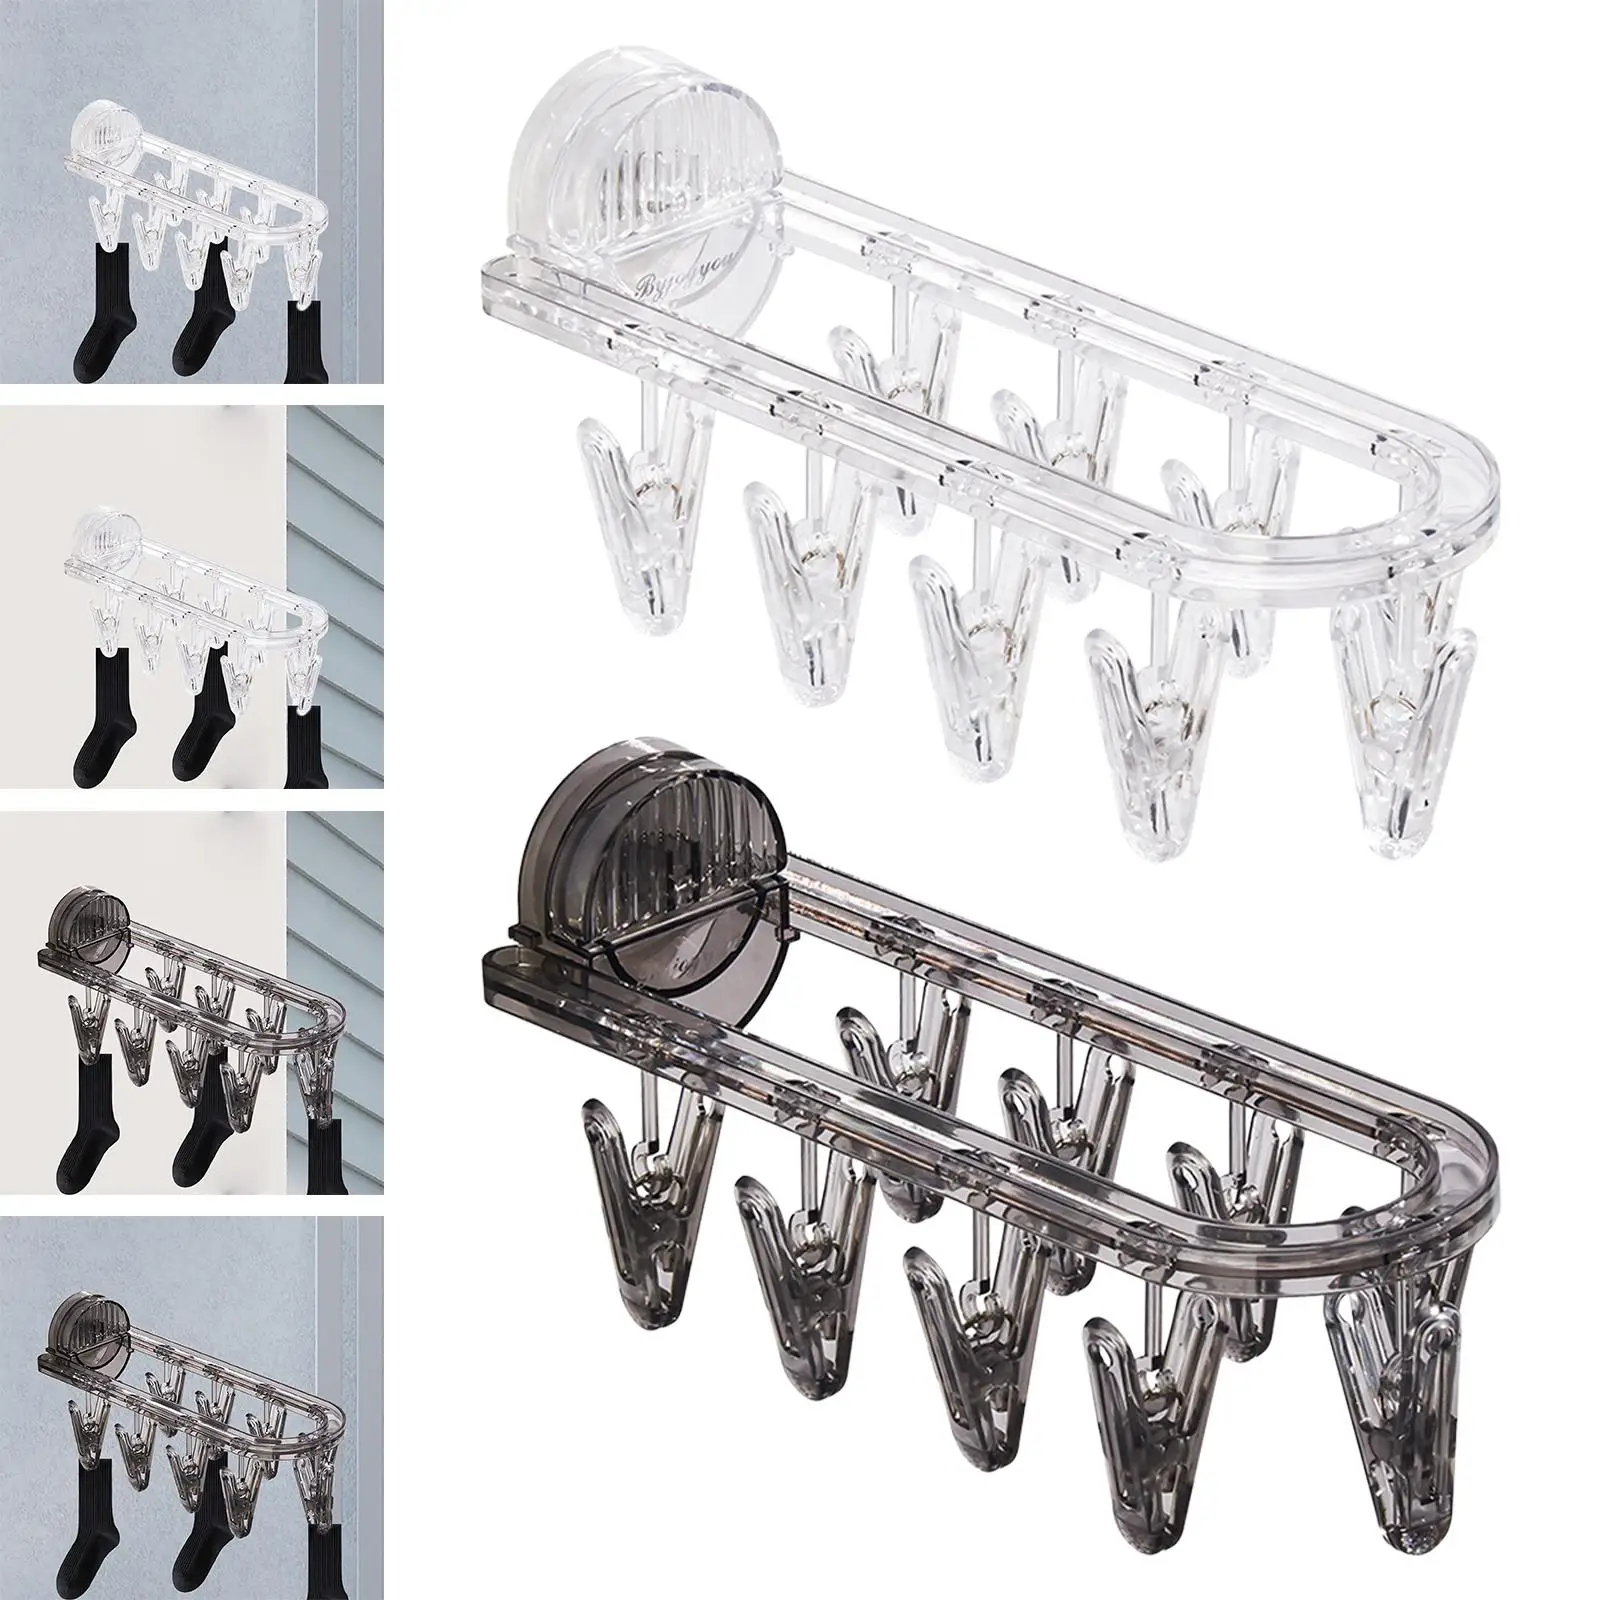 Foldable Laundry Hanger Drying Rack, Wall Mount, Drip Drying Hanger Laundry Clips for Baby Clothes Scarf, Underwear, Towels